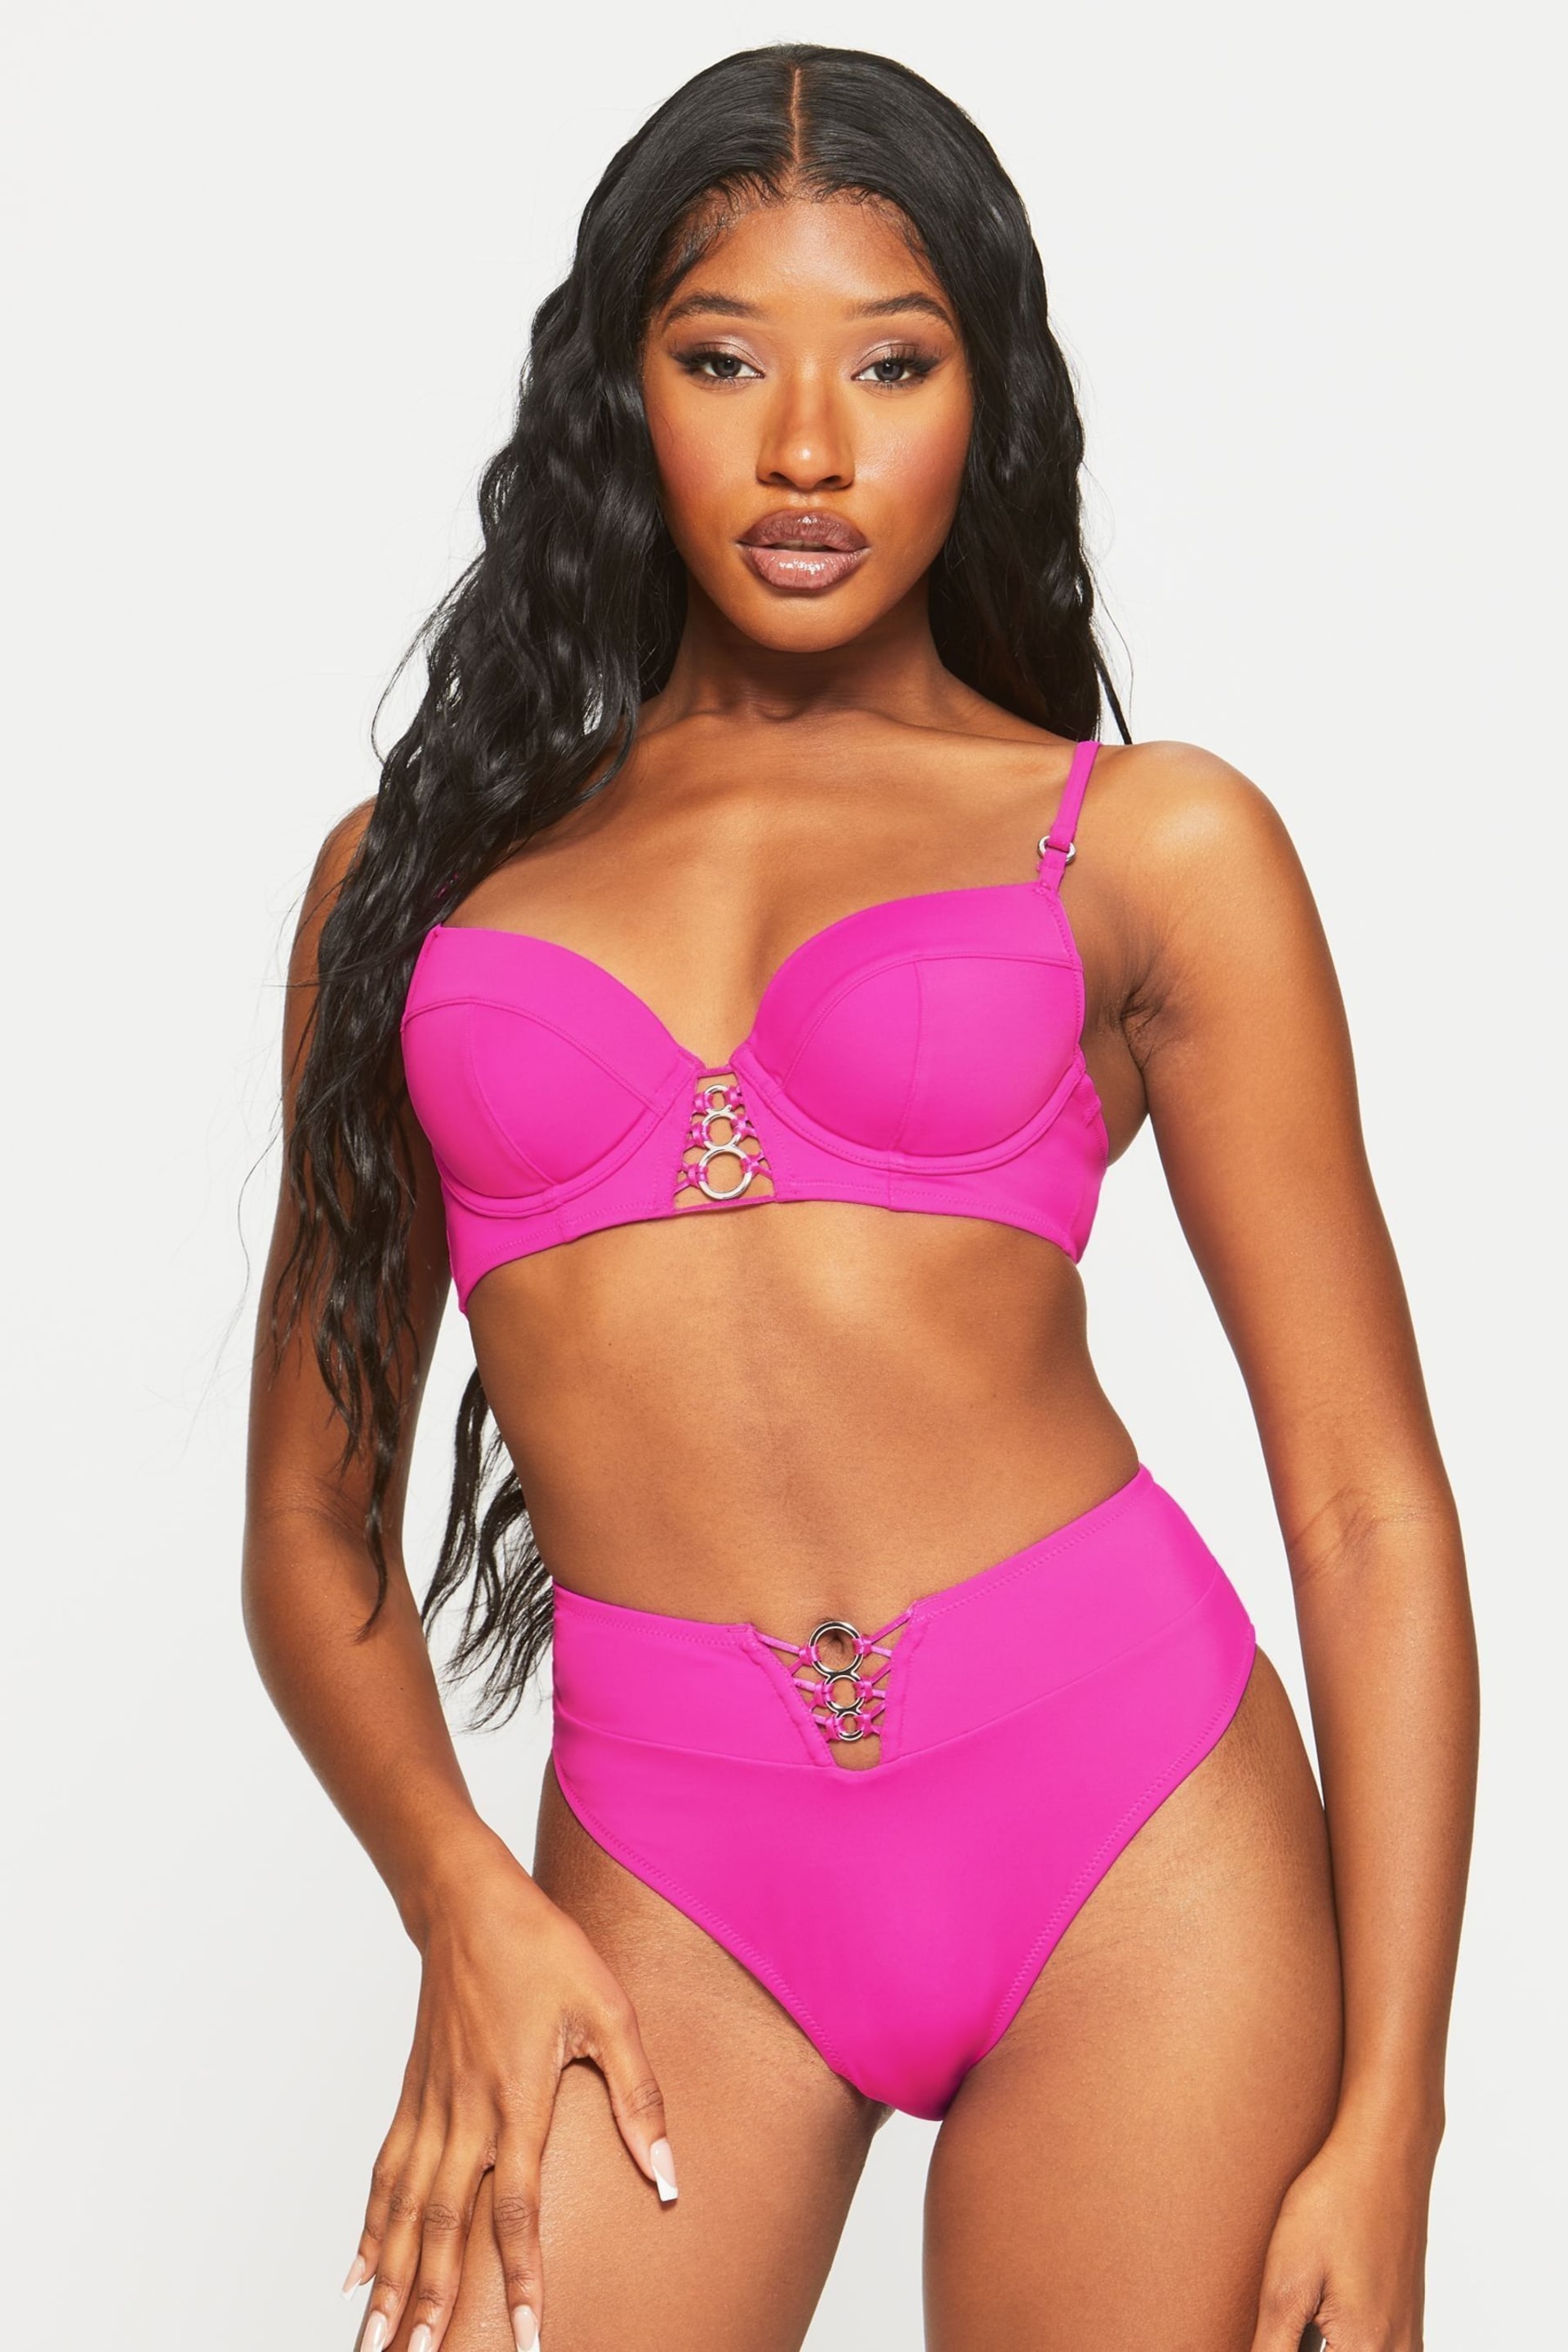 Ann Summers Pink Bright Miami Dreams High-Waisted Bikini Bottoms - Image 1 of 6